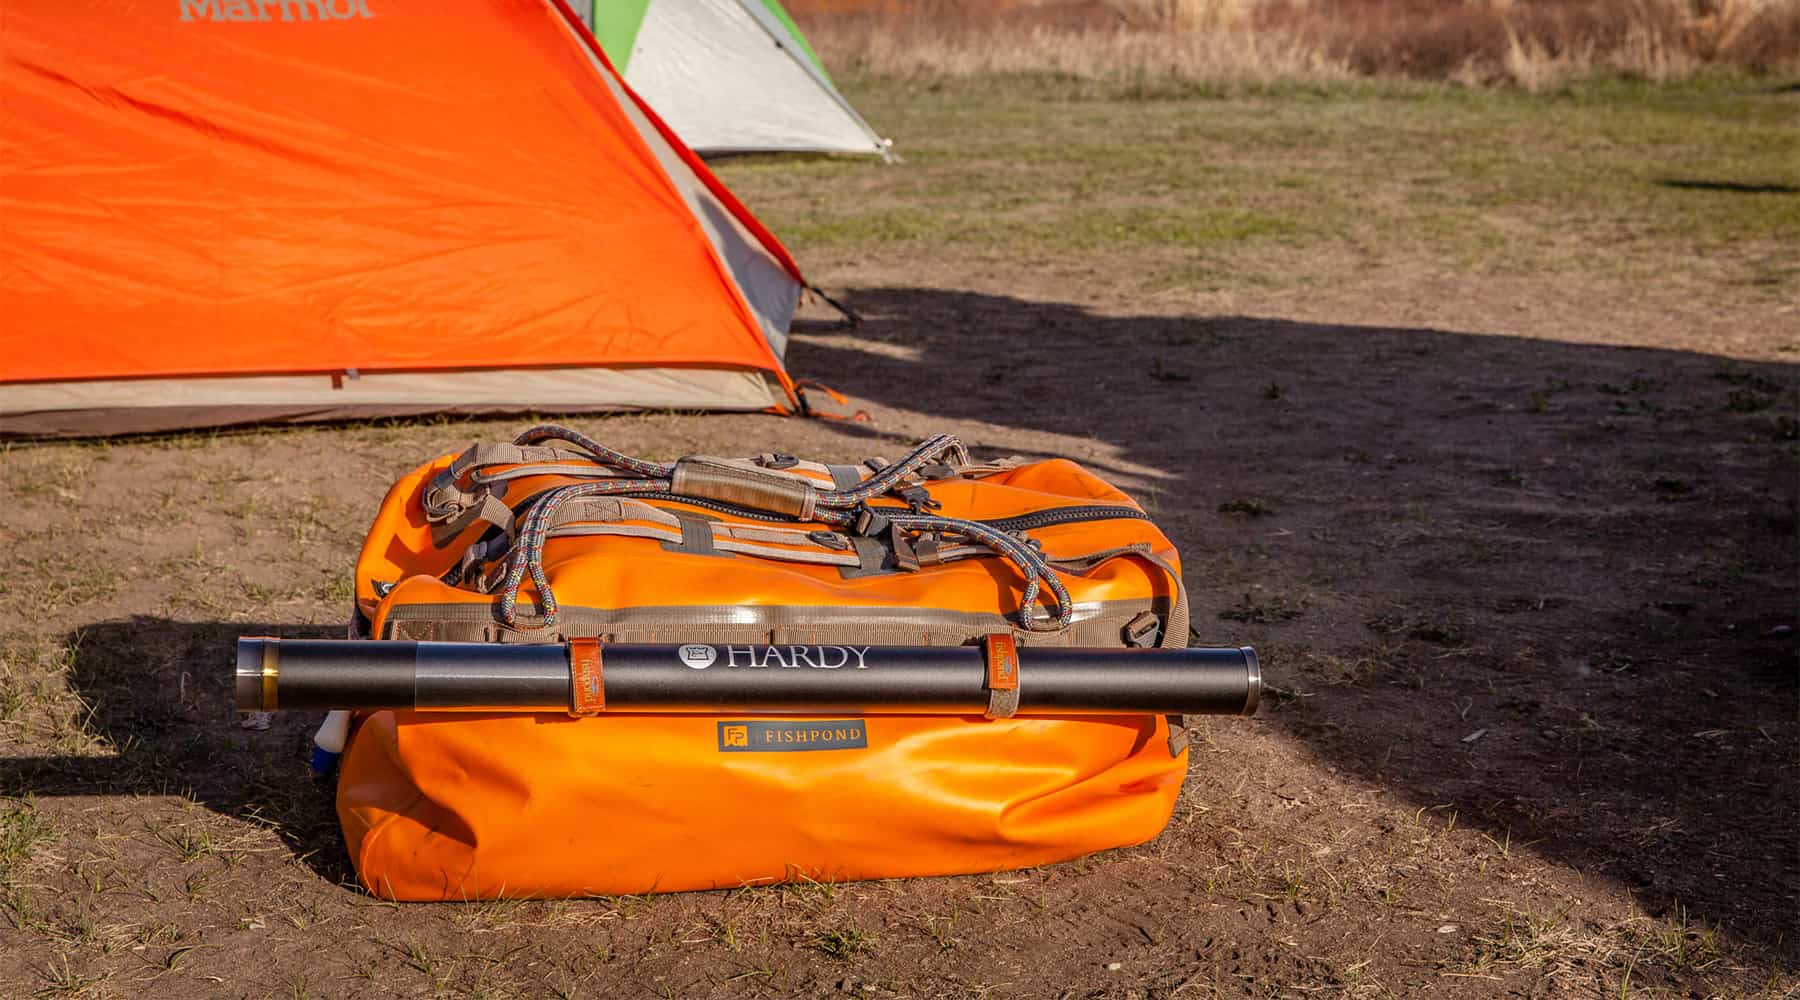 Why The Fishpond Thunderhead Submersible Duffel Should Be Part Of Your Travels - A Review